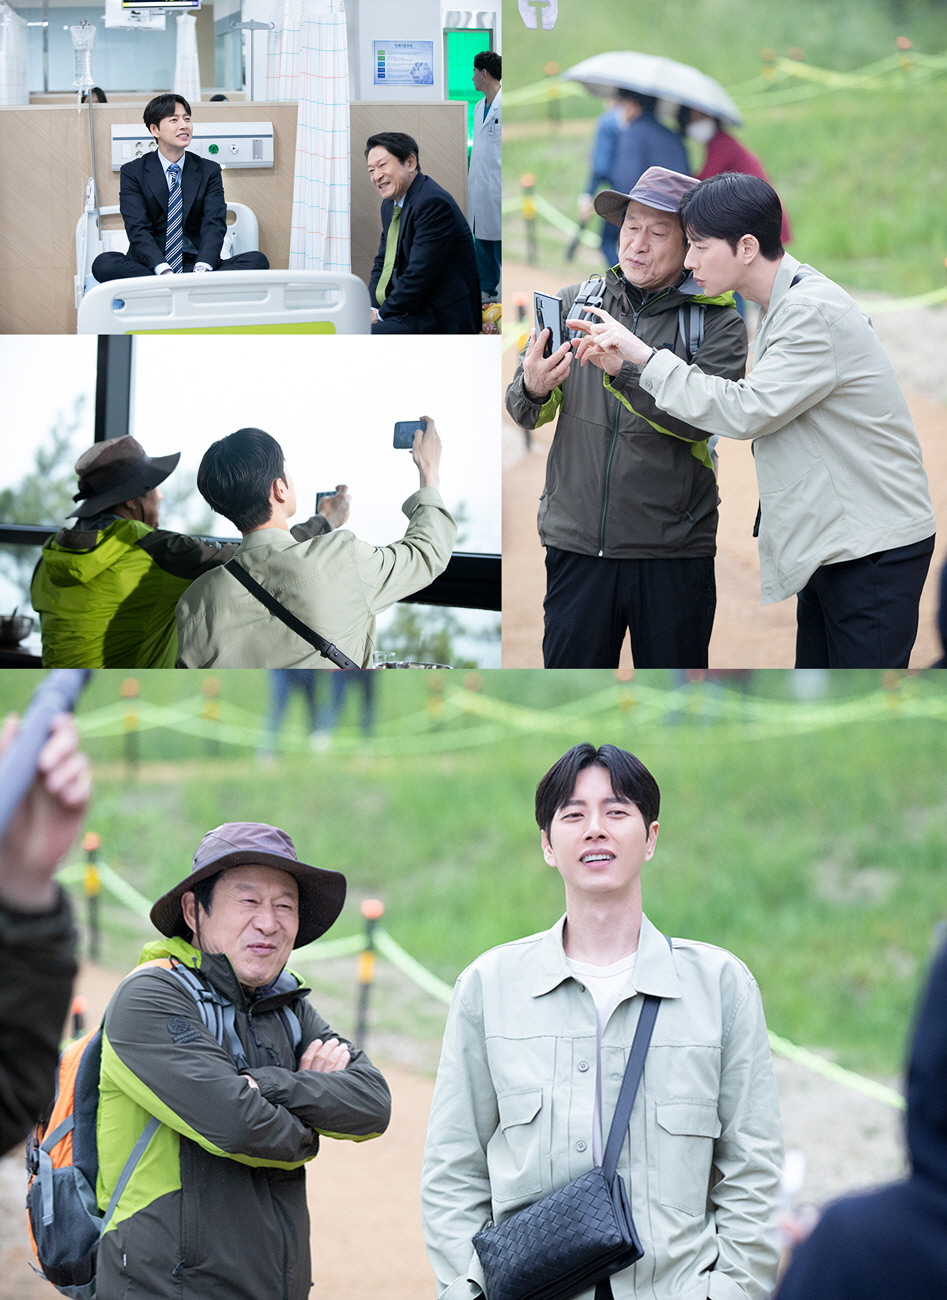 The hot topic is that the best-friendly scene cut of Park Hae-jin and Kim Eung-soo in Drama Lame Internet (directed by Male Woo/Press Shin So-ra/Produce Studio HIM), which shows steamy taste with a special broadcast and sweeps various topic charts, is released.After Park Hae-jin and Kim Eung-soo met to make the first place in the drama topic, Lame International, which ranked seventh in the number of news articles, overtook the dramas on air, unveiled the delightful scene cut of two leading actors, Actor, who is the first contributor to the topic.Lame International is a work that contains a disgusting and exciting revenge of a man who welcomes the worst manager of the company that managed to enter the company as an underling.It is a drama that expects empathy through the story of a real job because people called the university are showing the message that we will eventually become together with the generation and the generation.In the play, Park Hae-jin met a heinous boss and spent his days in The Intern, and then played the role of a hot-aired man who was promoted to the manager at once by developing hot chicken noodles that cause a nuclear storm in the ramen system.He is a top star manager of a perfect ramen company that can not even look, character and skill in appearance. He will play revenge, not revenge, meeting Lee Man-sik, a former boss and former boss who has put himself in a pit of hardship with Senior The Internet.In particular, Kim Eung-soo, who is called the emperor of the adverb in Lame International, which became a hot topic due to the meeting of the artisans of Acting, will show the essence of Latte is the word ~ and show the steam aspect in the drama without filtering. Drama officials said that they responded to the adverb and devastated the scene every scene.It took time, but its a godsend to cast these two actors in our Drama, said studio HIM.I think that is what these two actors are saying.I would like to express my gratitude to the two actors who are taking care of each other and saving each other, and dragging their juniors on the spot. Meanwhile, Lame Internet will be available on the online broadcast movie platform wave as VOD (see again) at 8:55 pm on Wednesday, May 20.